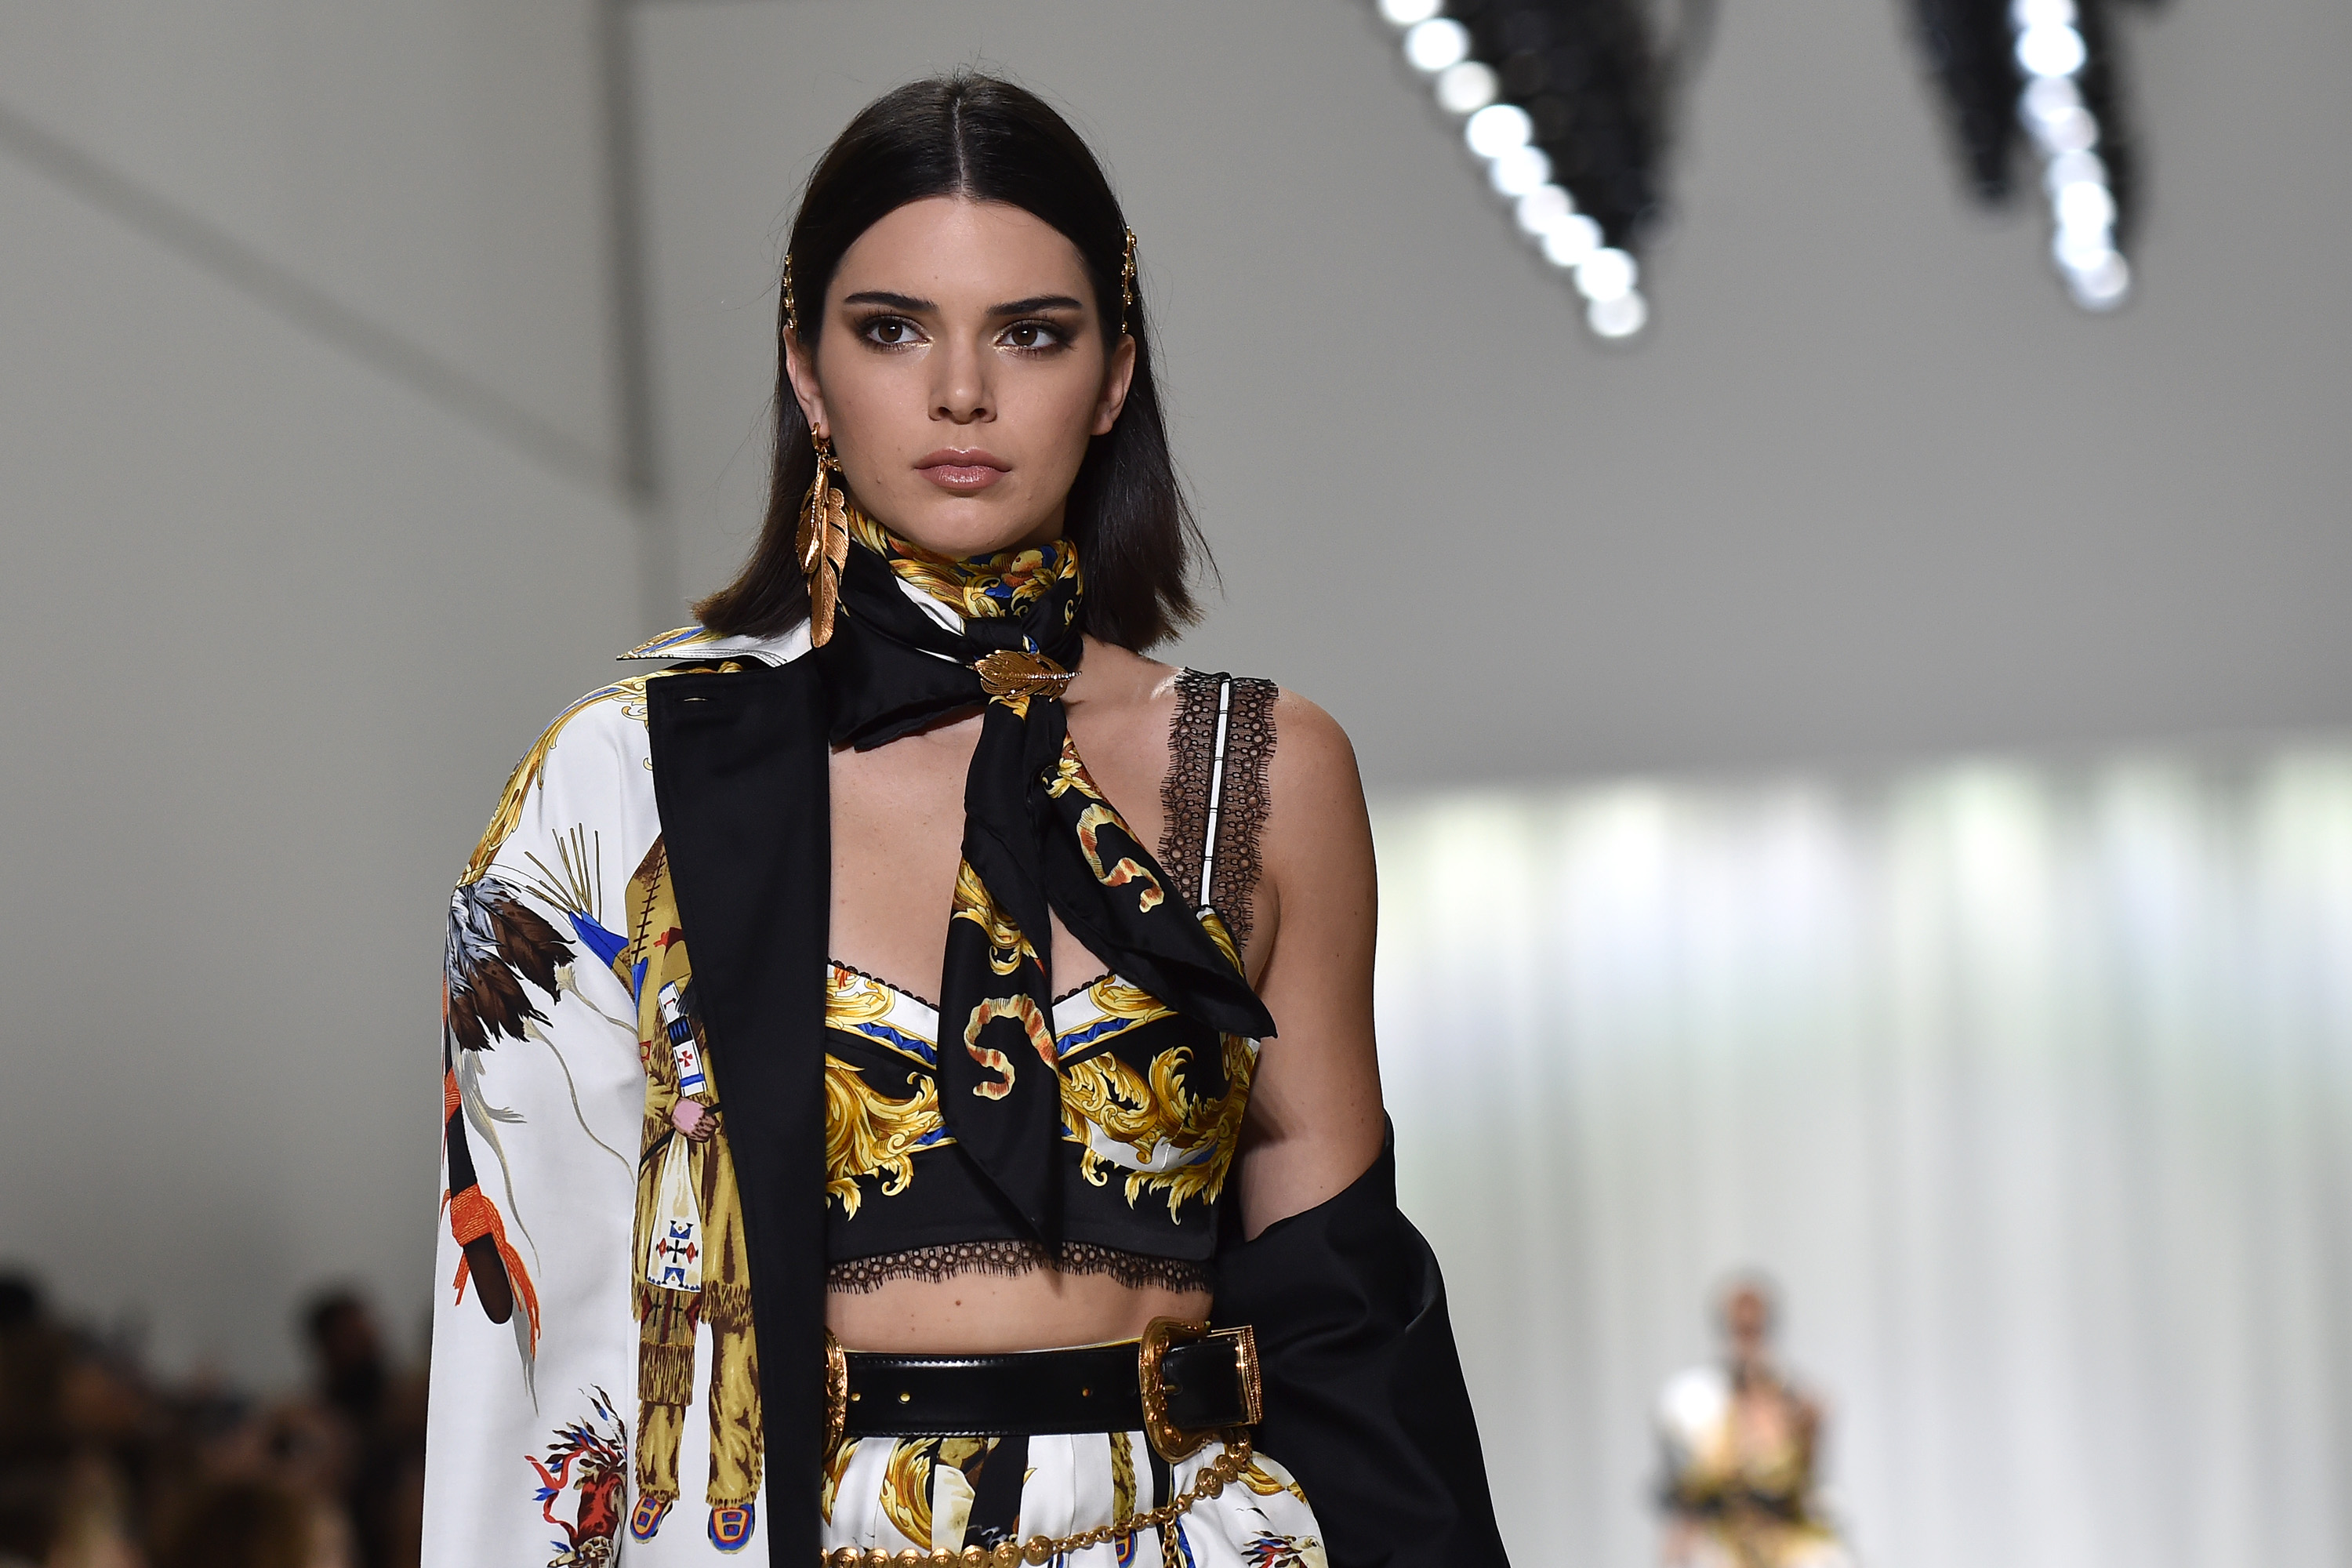 Kendall Jenner Opens Up on Her Life as the Highest-Paid Model